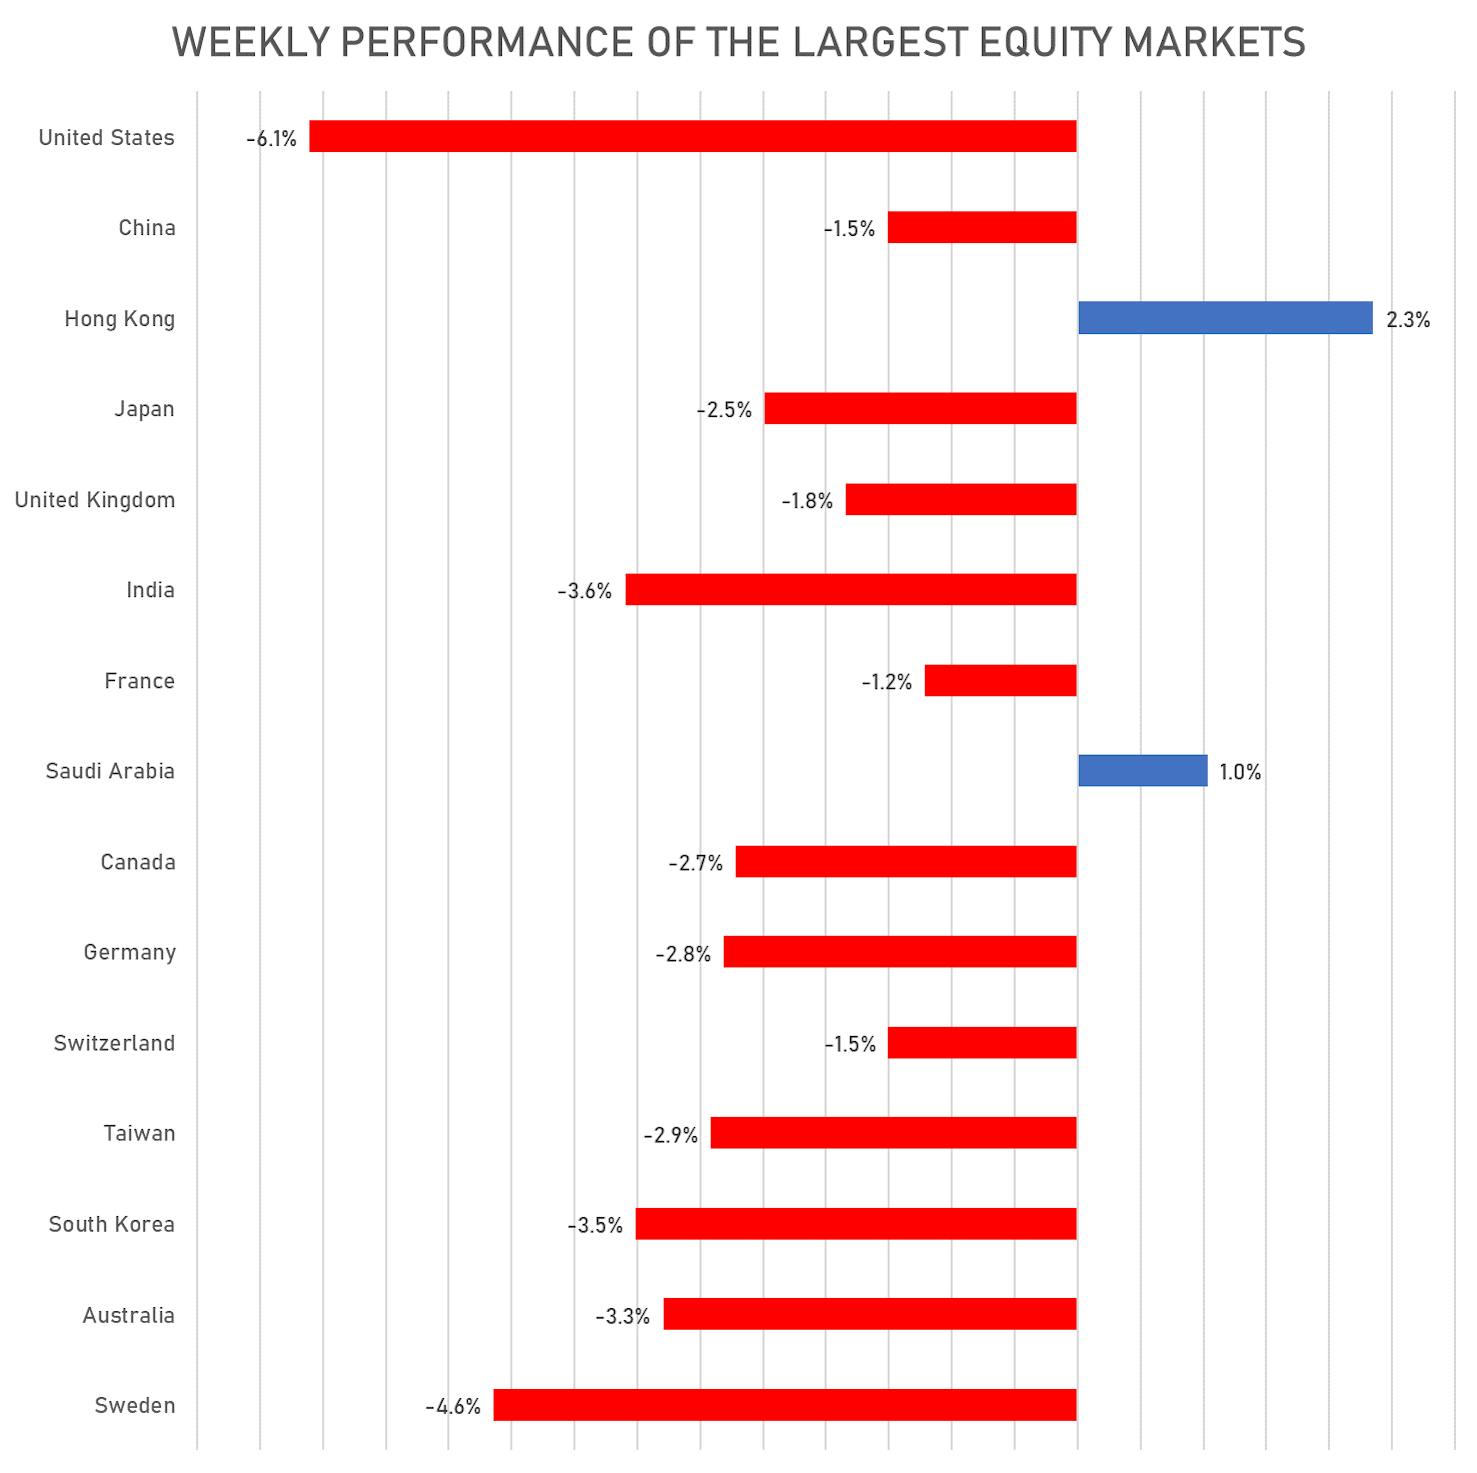 Weekly Performance Of The Largest Equity Markets | Sources: phipost.com, FactSet data